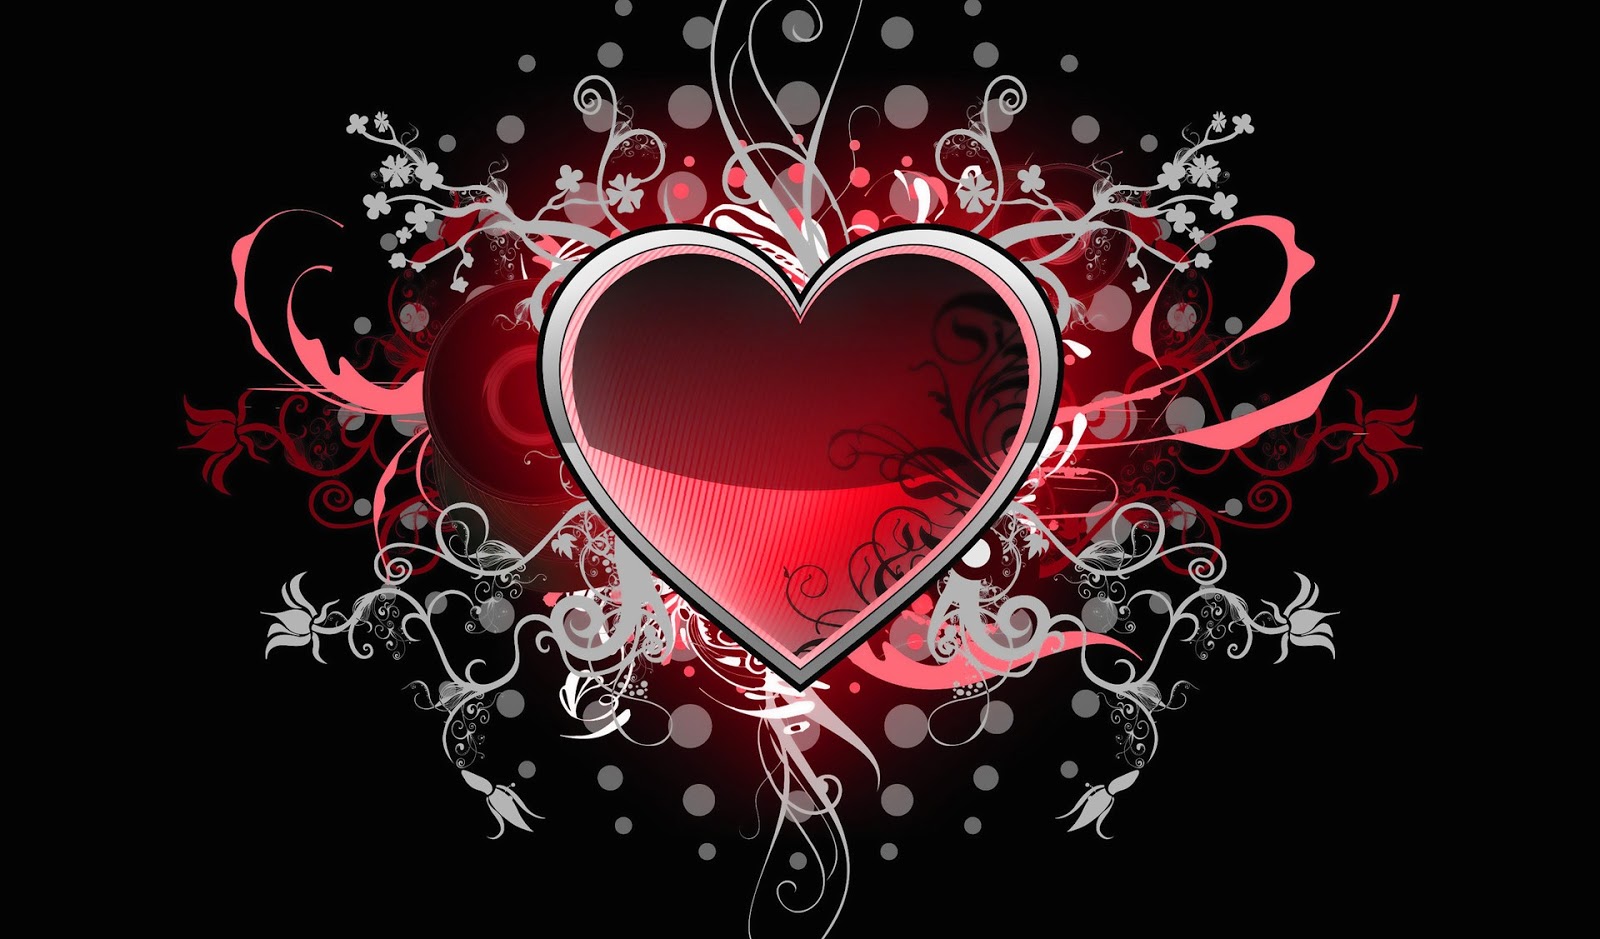 Free download 43] Love Heart Wallpaper Software Download on ...